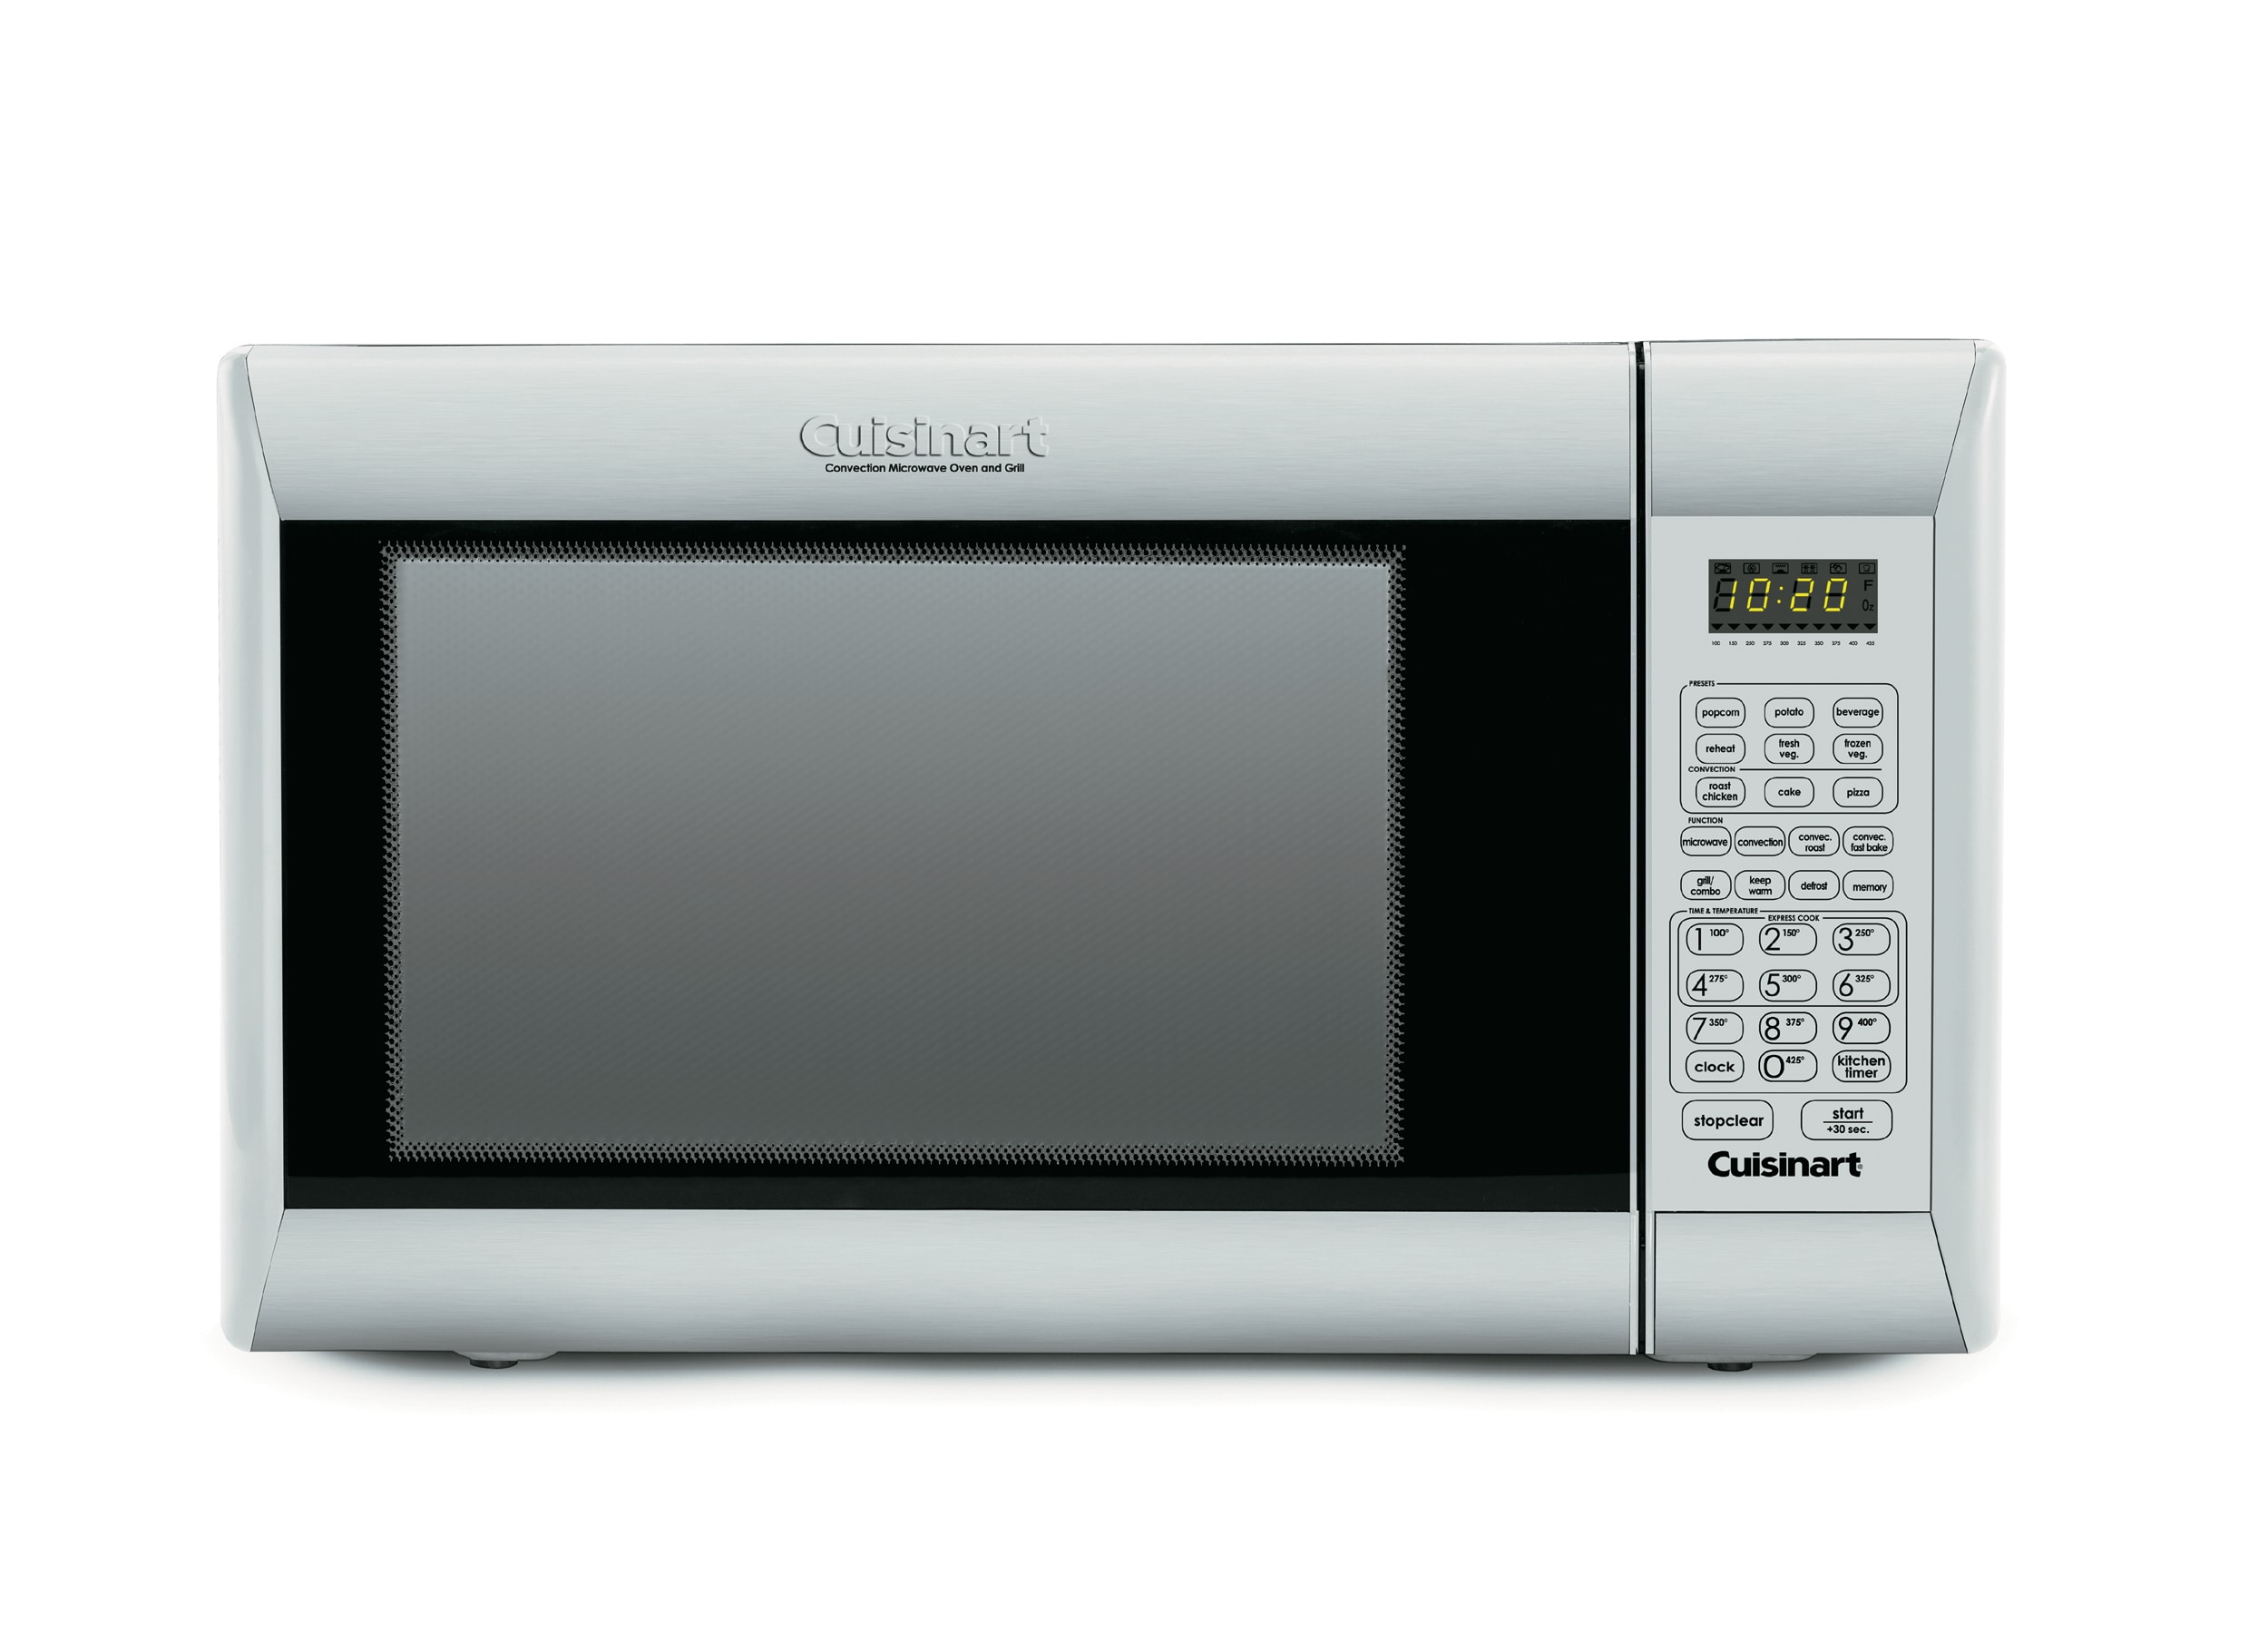 Cuisinart CMW100 Stainless Steel Countertop Microwave